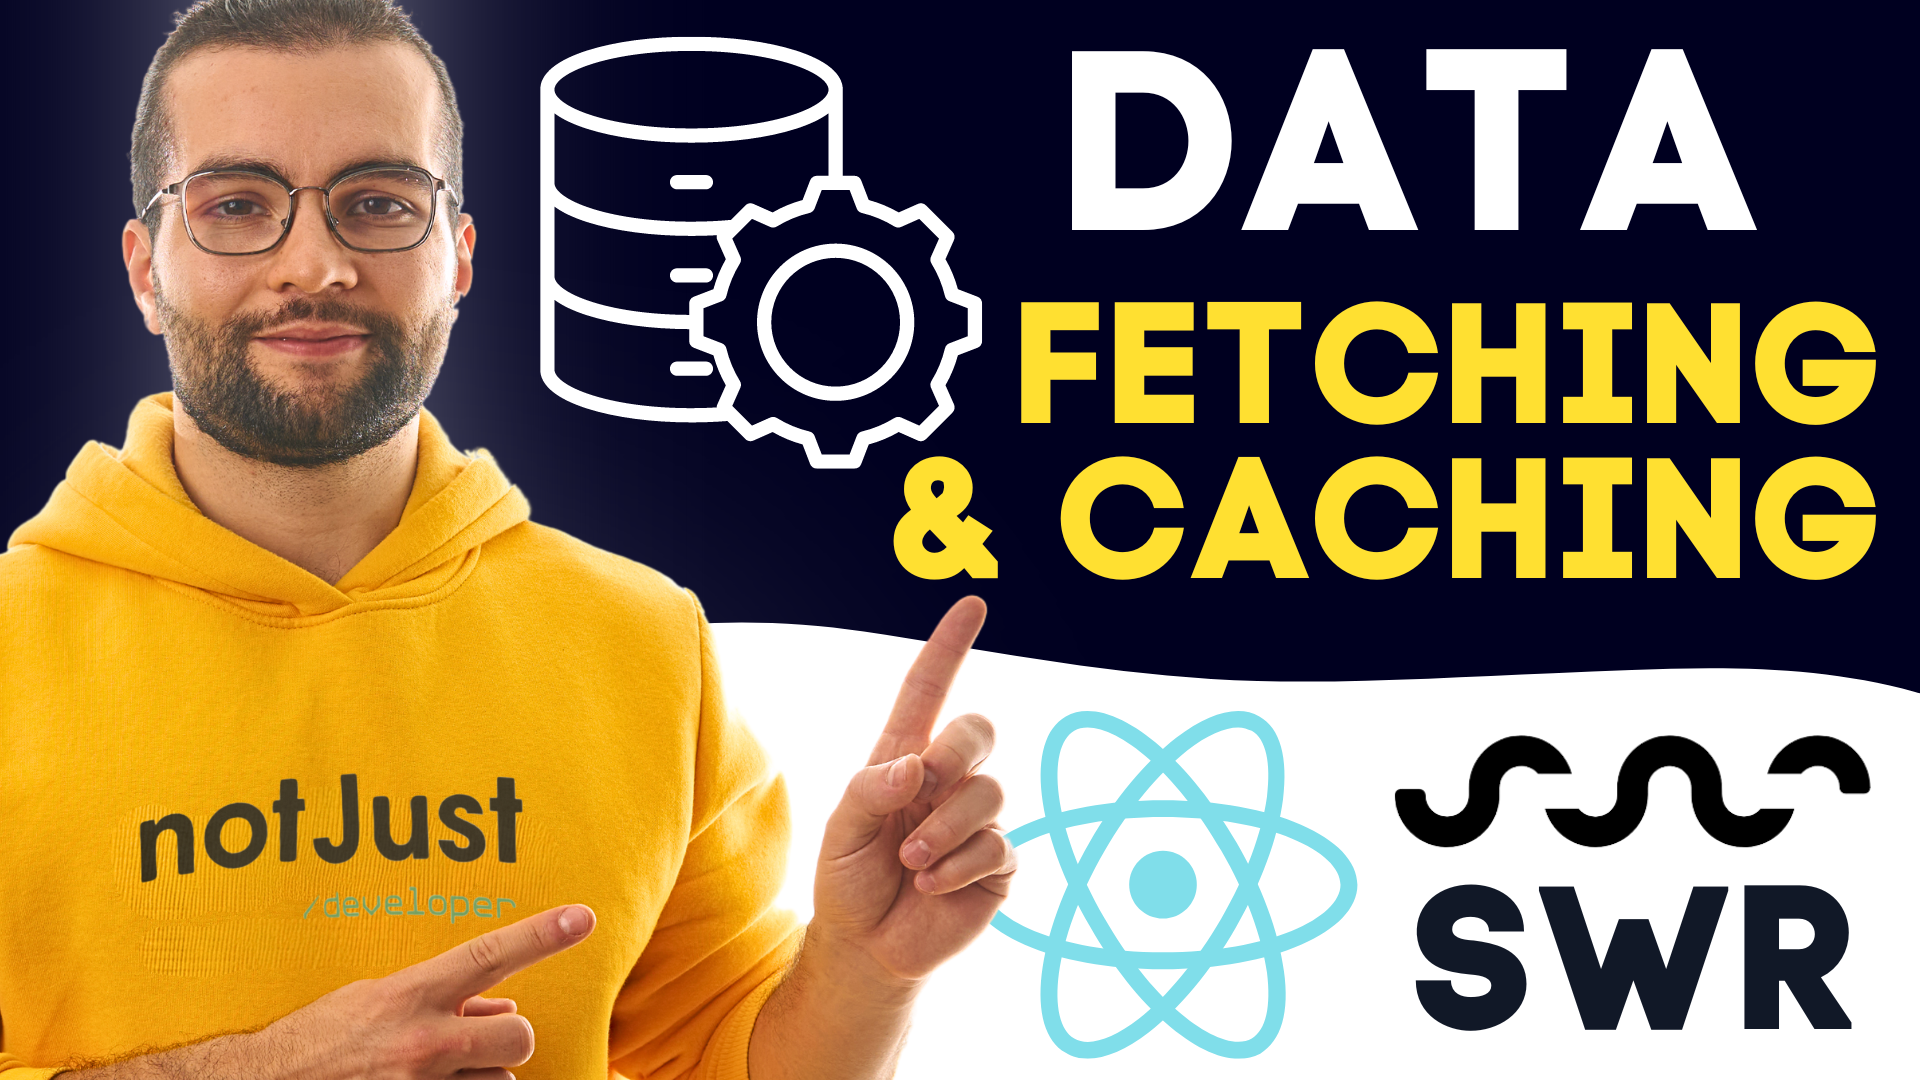 How to use SWR in React Native - Fetch and Cache data